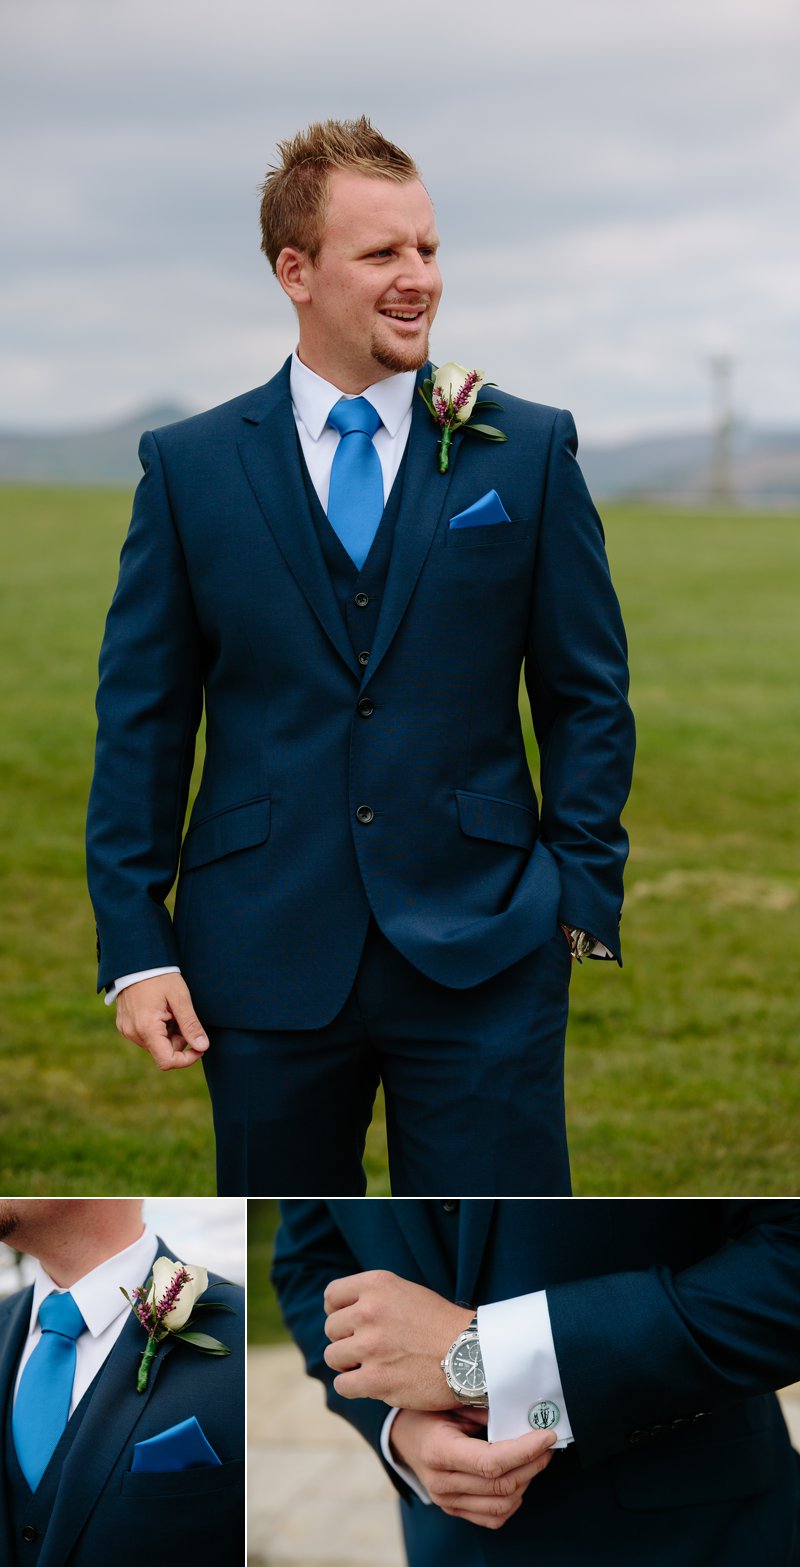 Groom photographs with cufflinks and buttonhole